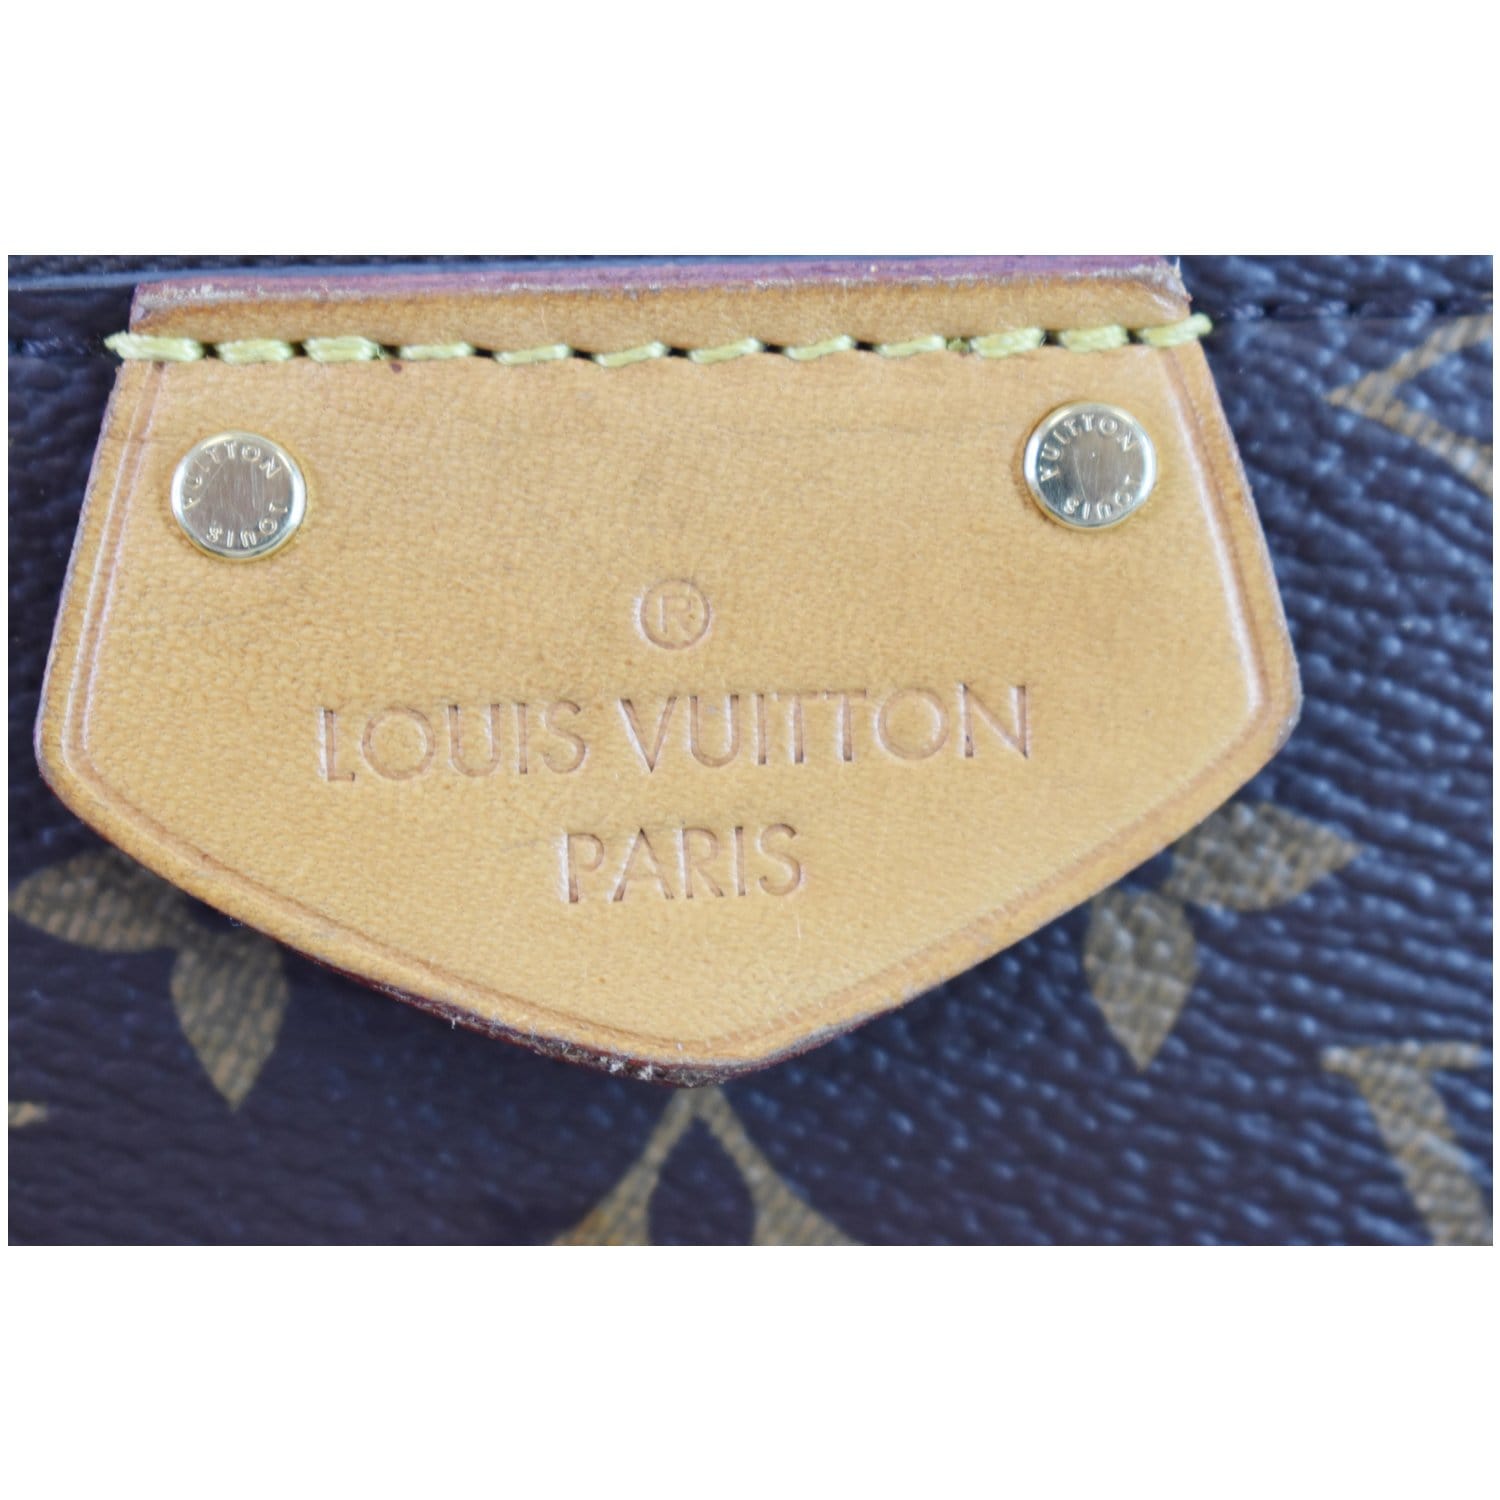 Best Louis Vuitton Turenne Mm for sale in Naperville, Illinois for